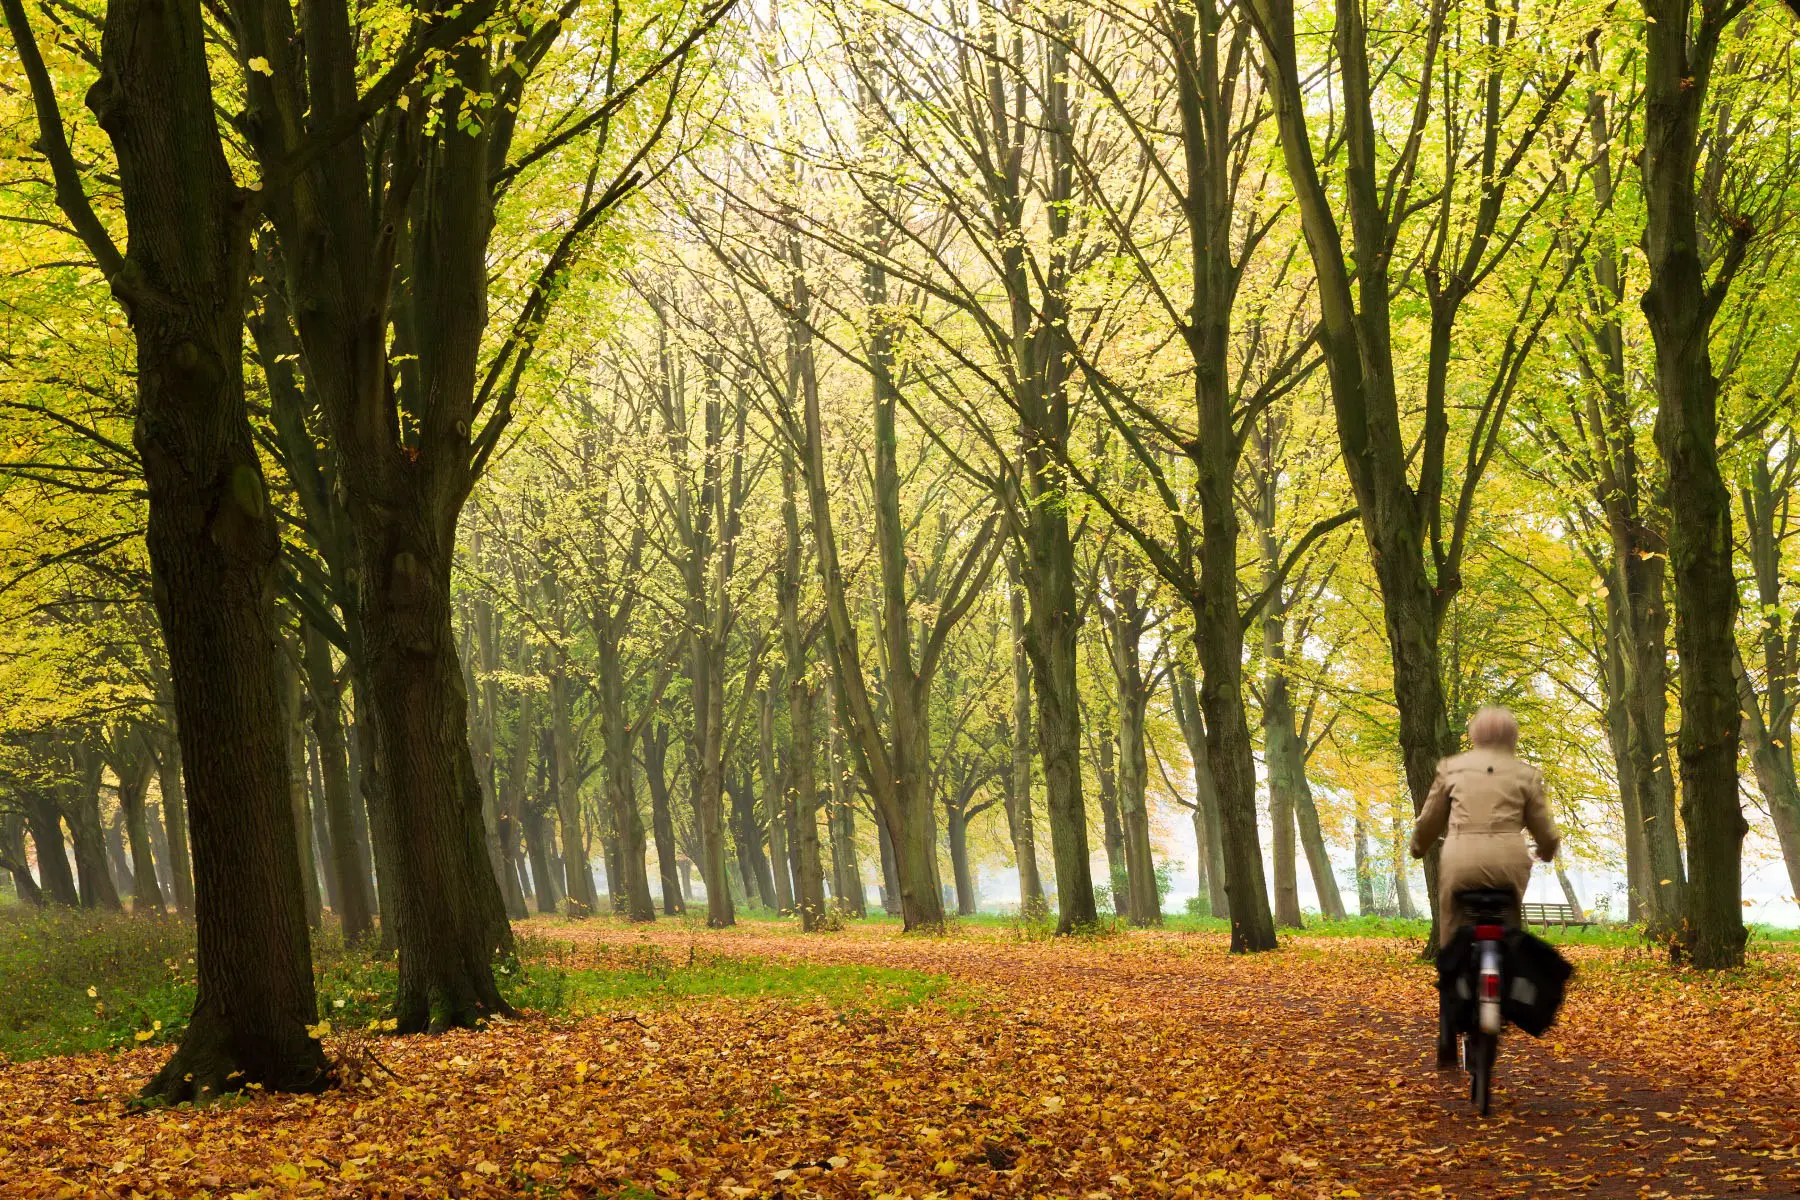 A woman riding a bicycle through a canopy of trees in autumn in Amsterdamse Bos